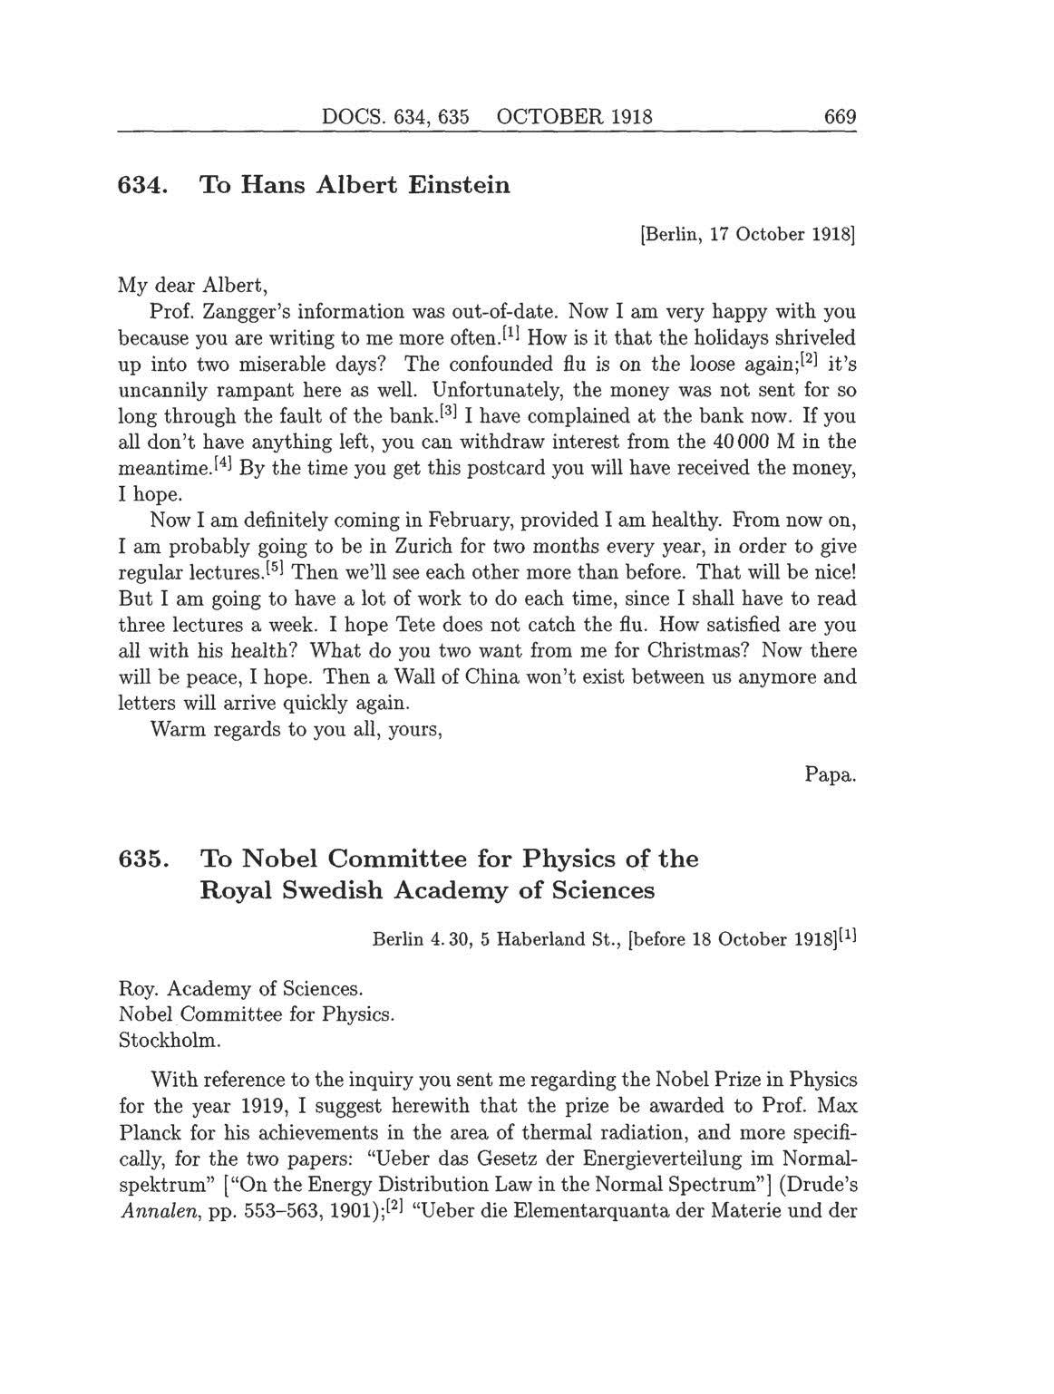 Volume 8: The Berlin Years: Correspondence, 1914-1918 (English translation supplement) page 669